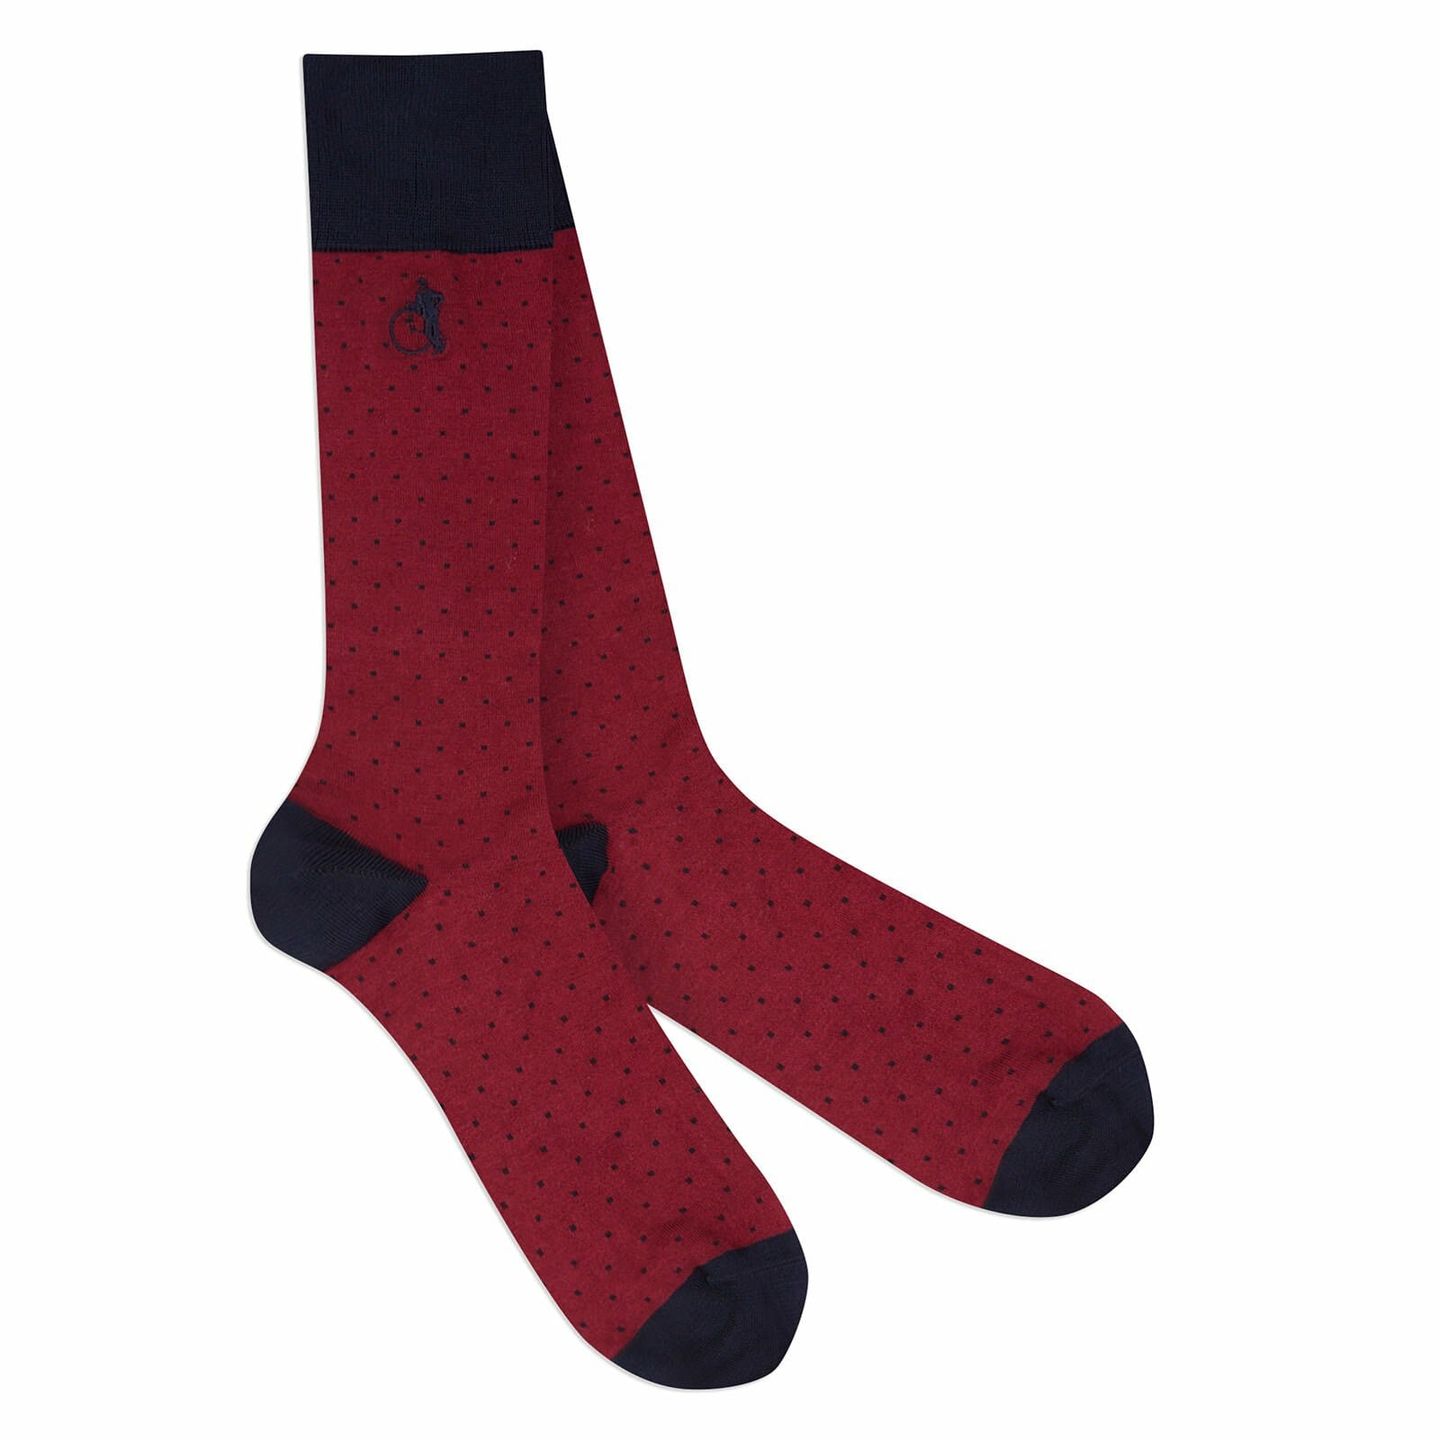 A pair of red socks with patterned black dots